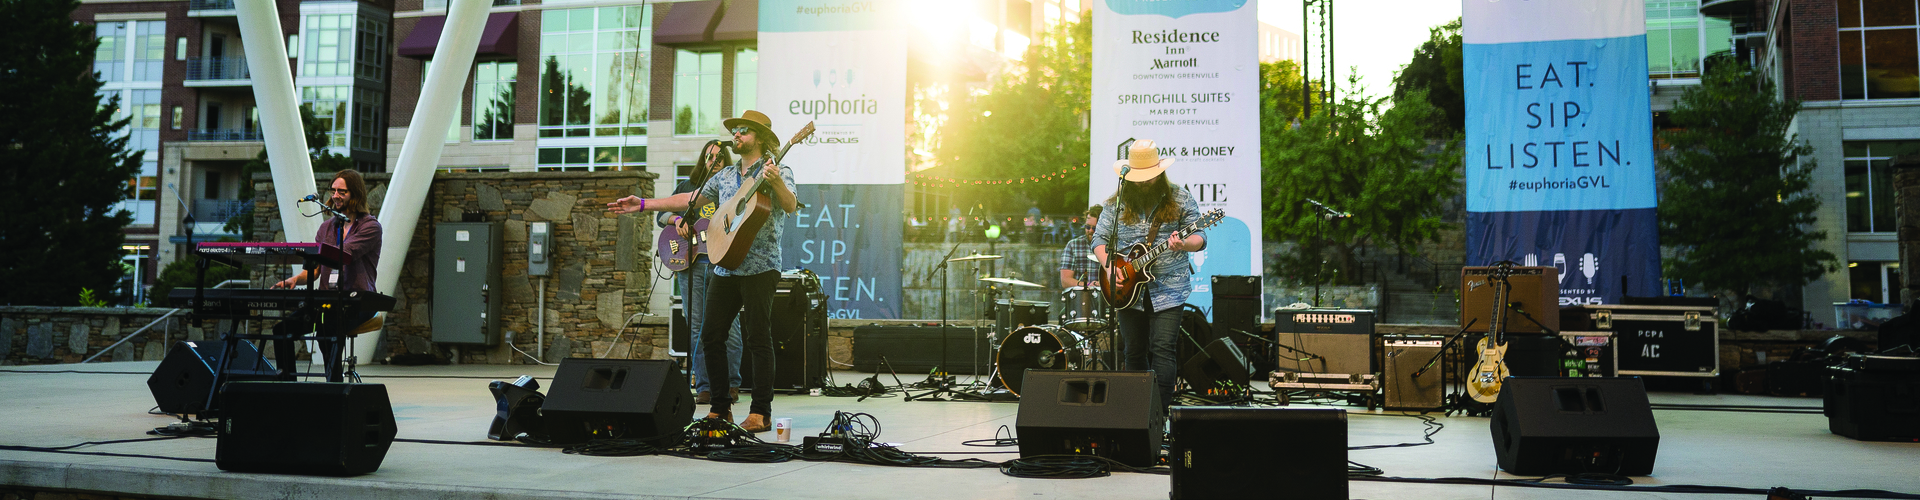 euphoria, the celebration of food, drink and music returns for 17th year in Greenville.